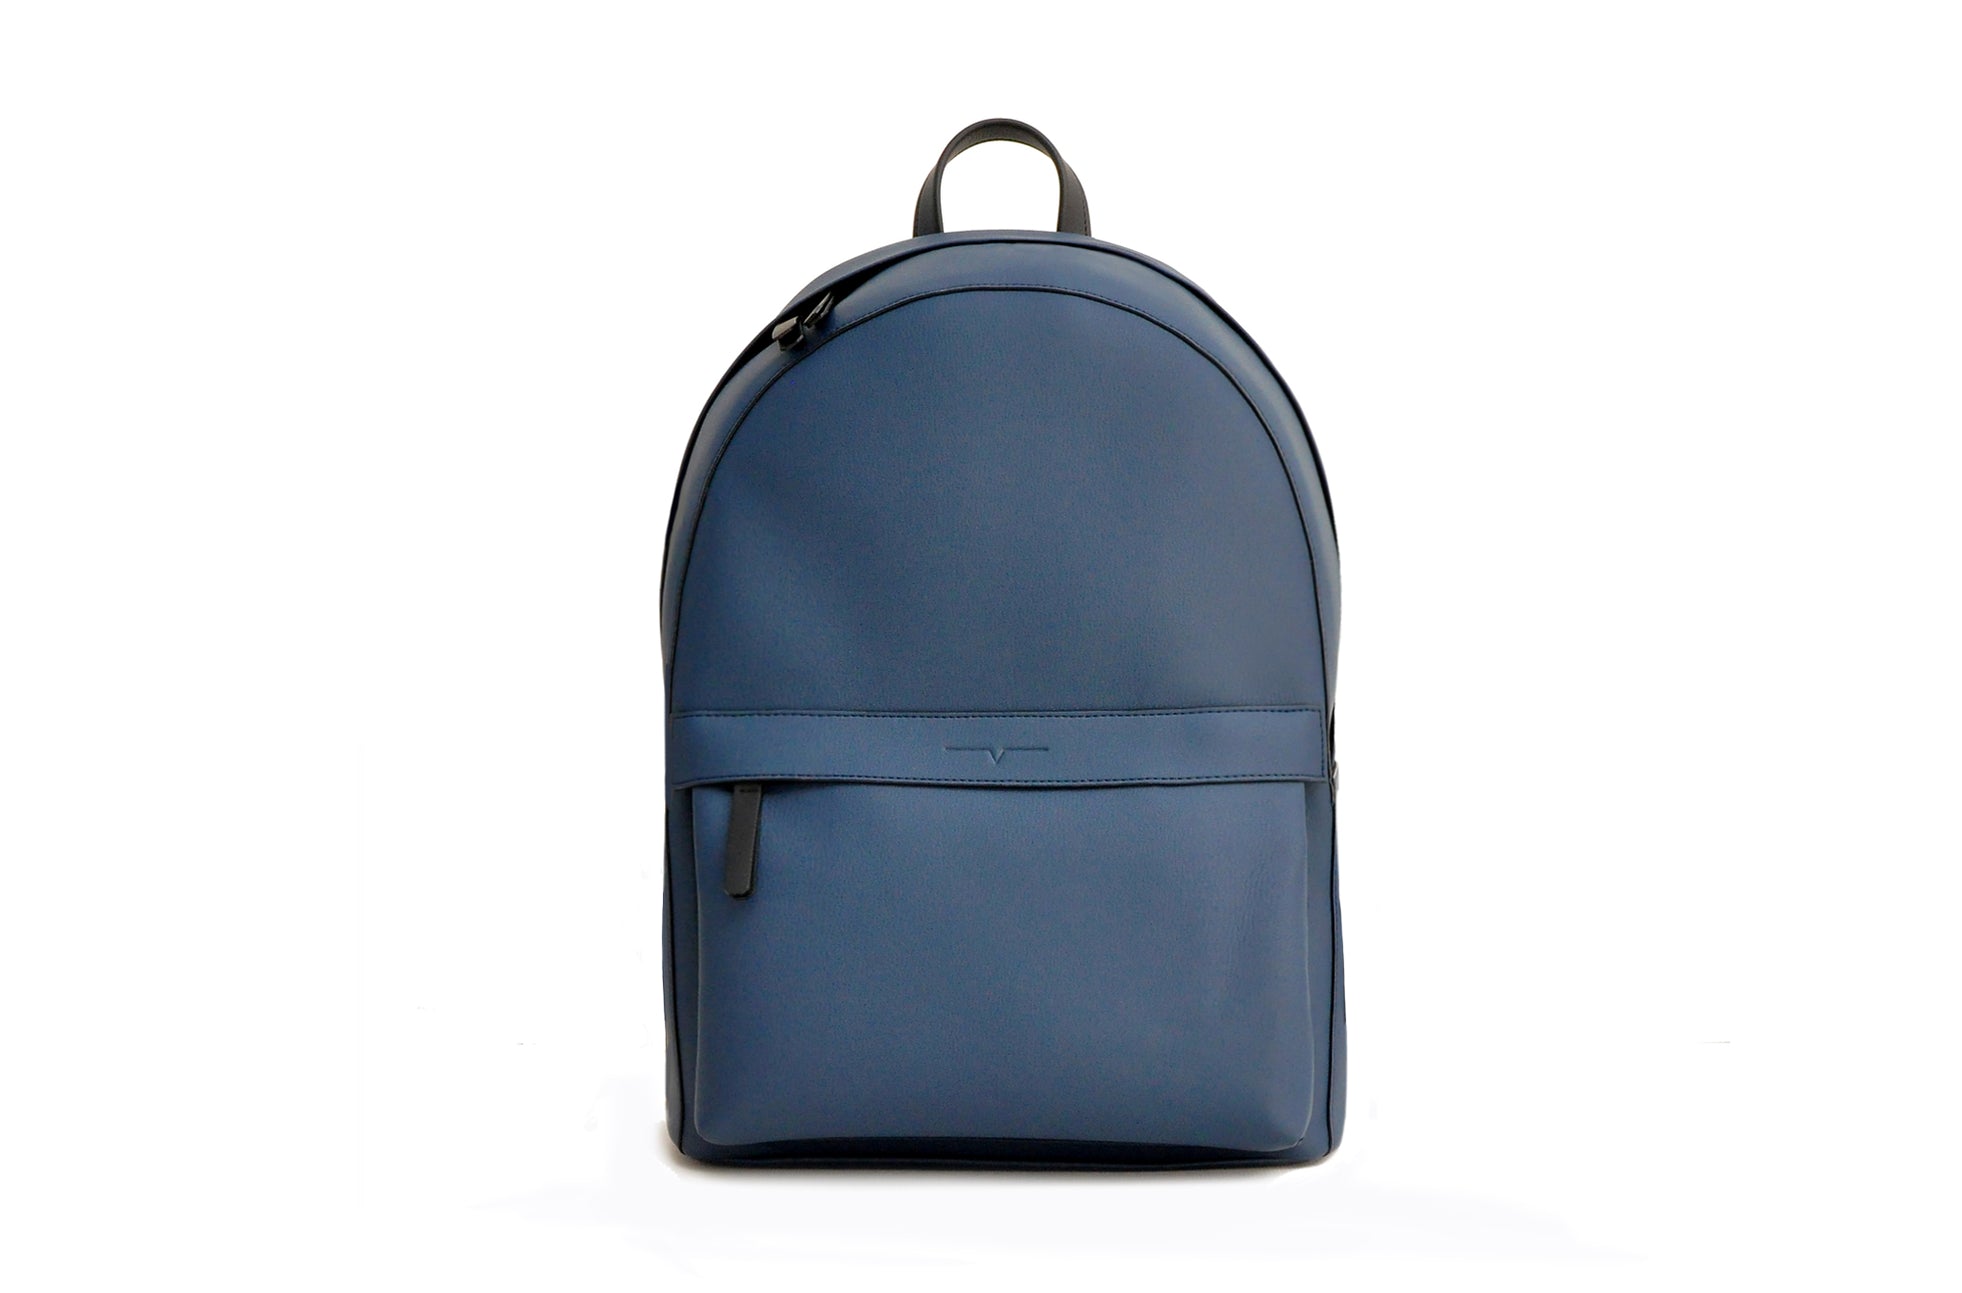 The Classic Backpack in Technik in Denim and Black image 